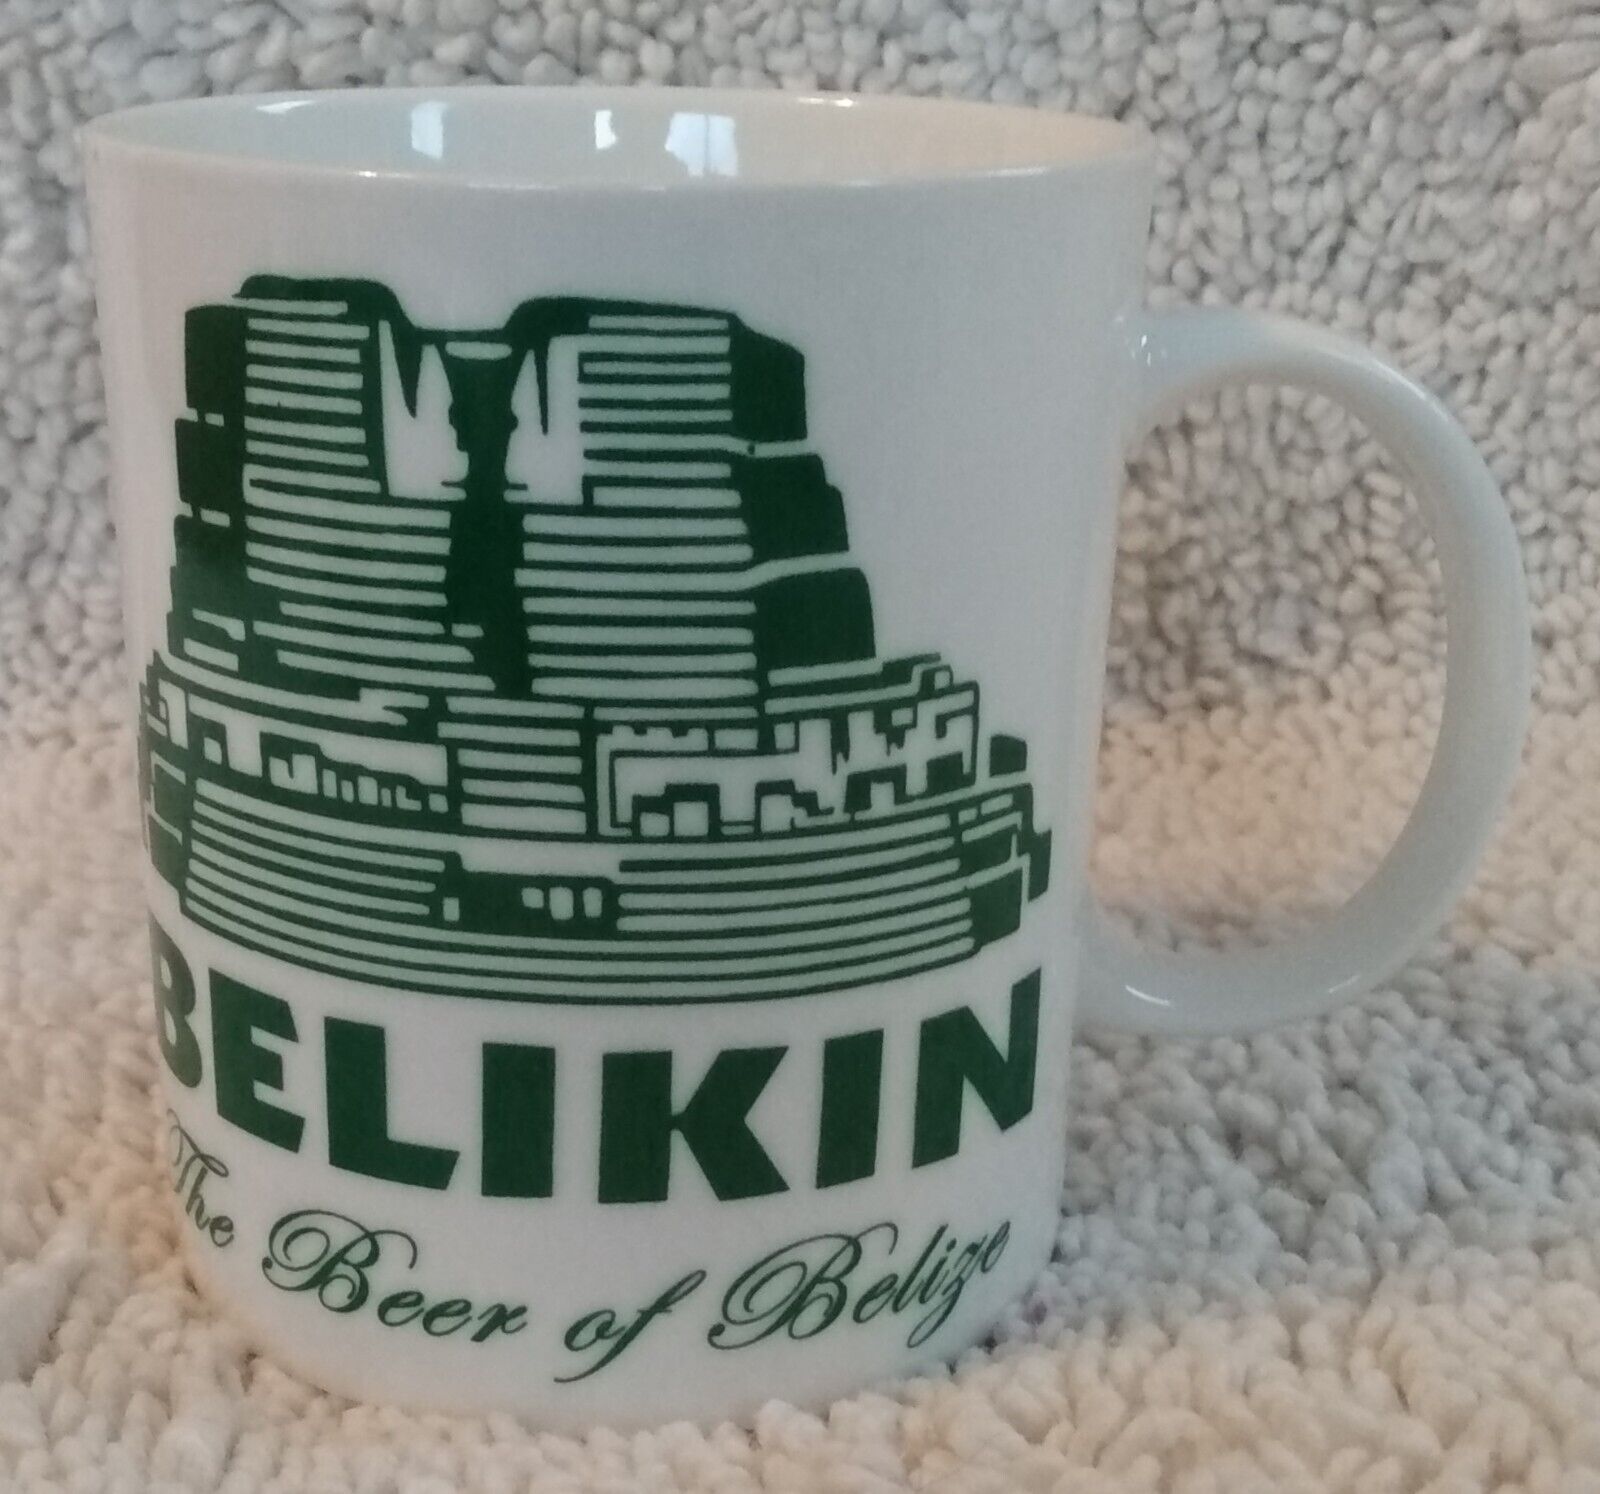 Belikin The Beer of Belize White Cup Green Print 10 1/2 oz Excellent Condition